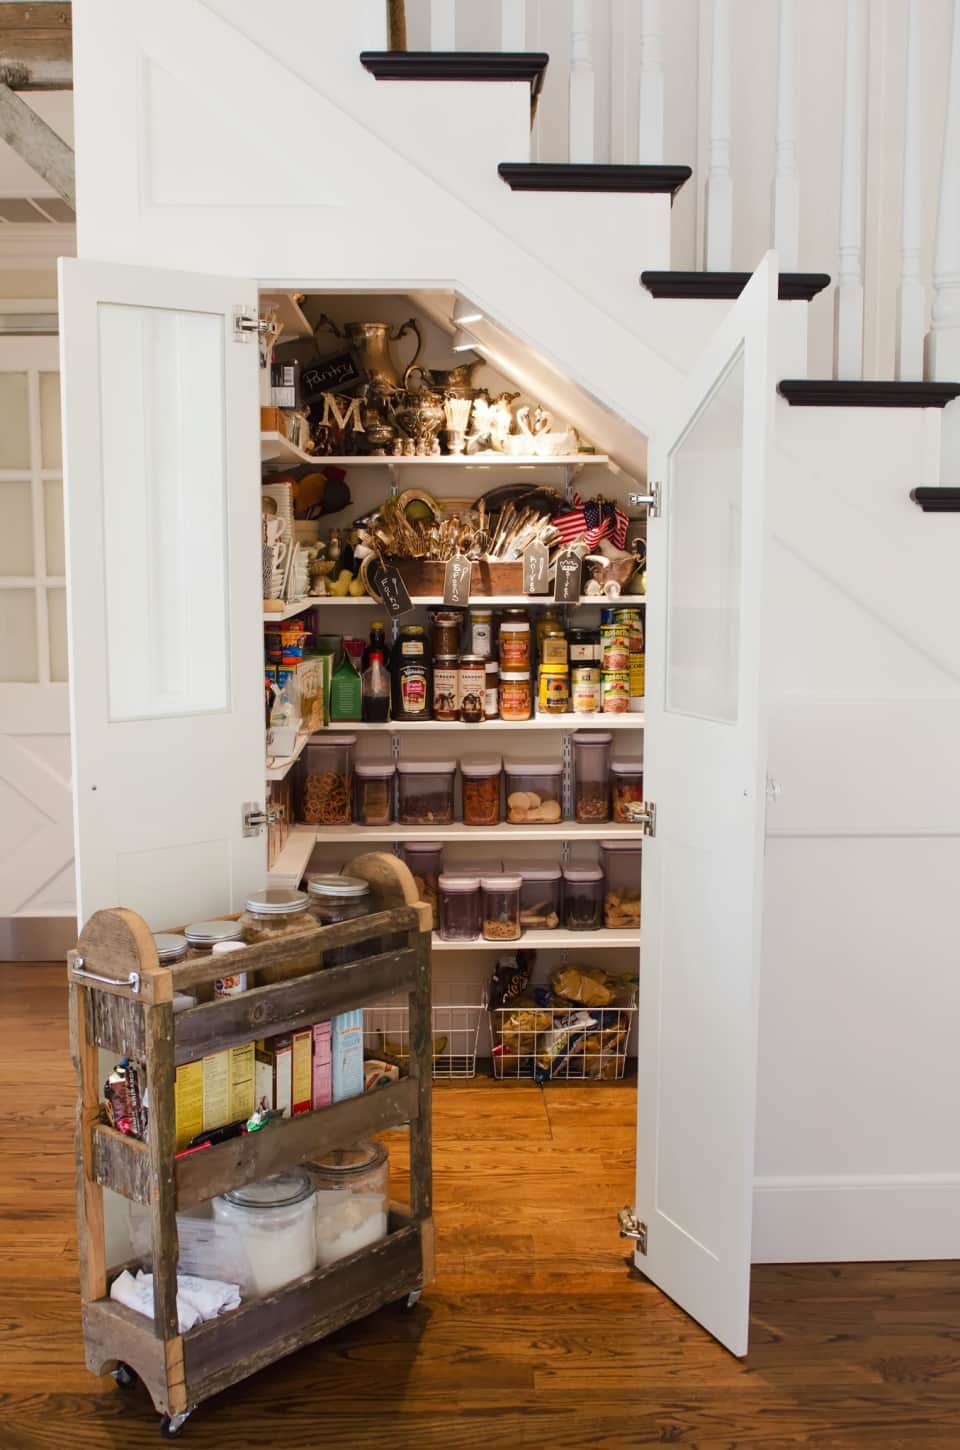 Under The Stairs Storage | Food Storage Ideas for Small Homes